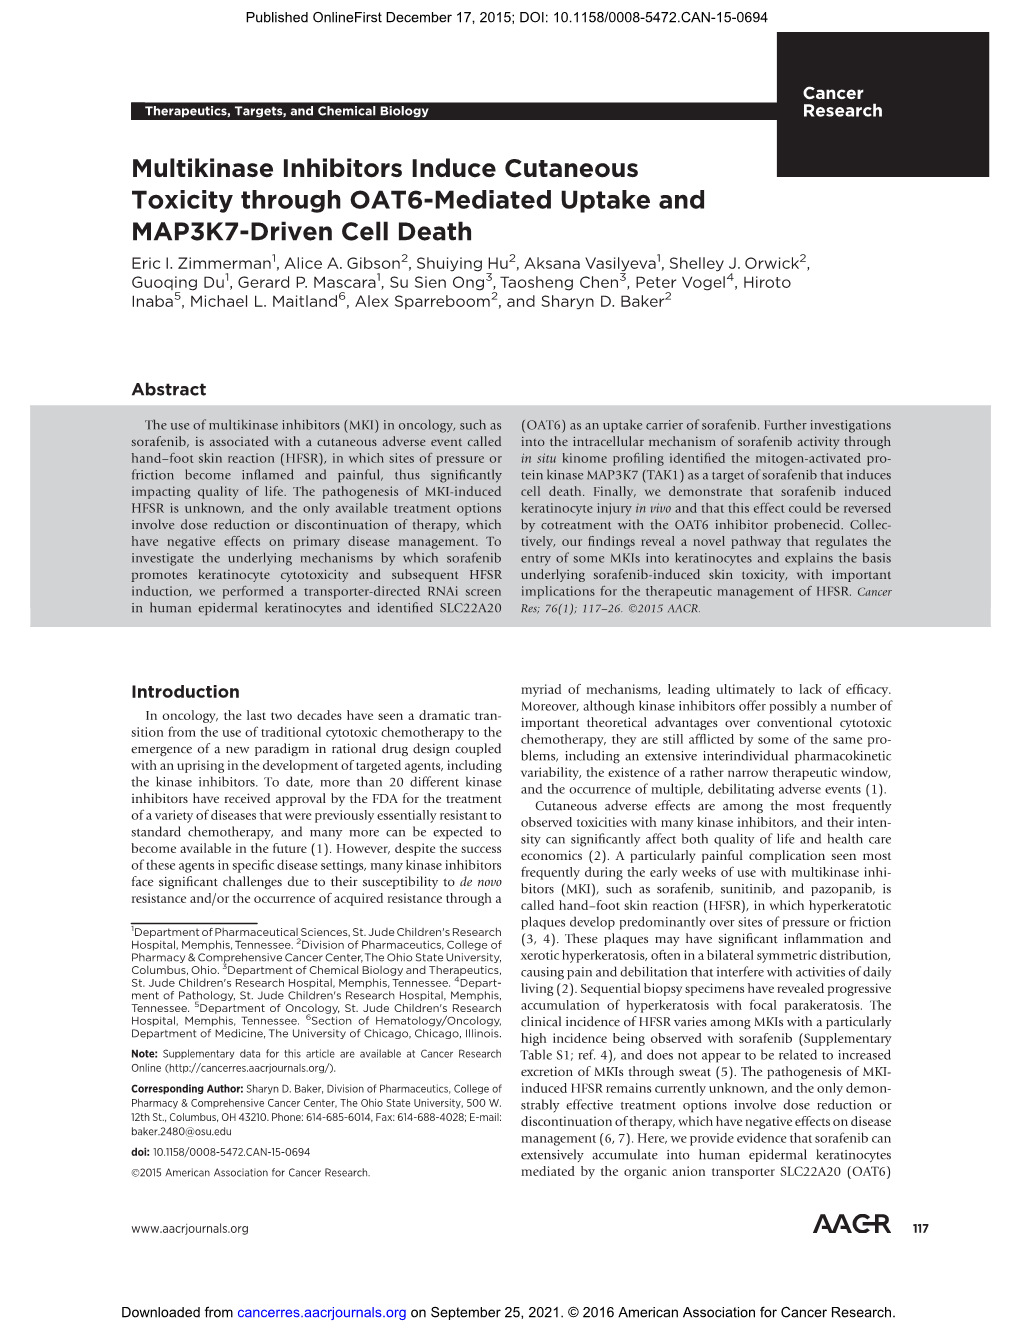 Multikinase Inhibitors Induce Cutaneous Toxicity Through OAT6-Mediated Uptake and MAP3K7-Driven Cell Death Eric I